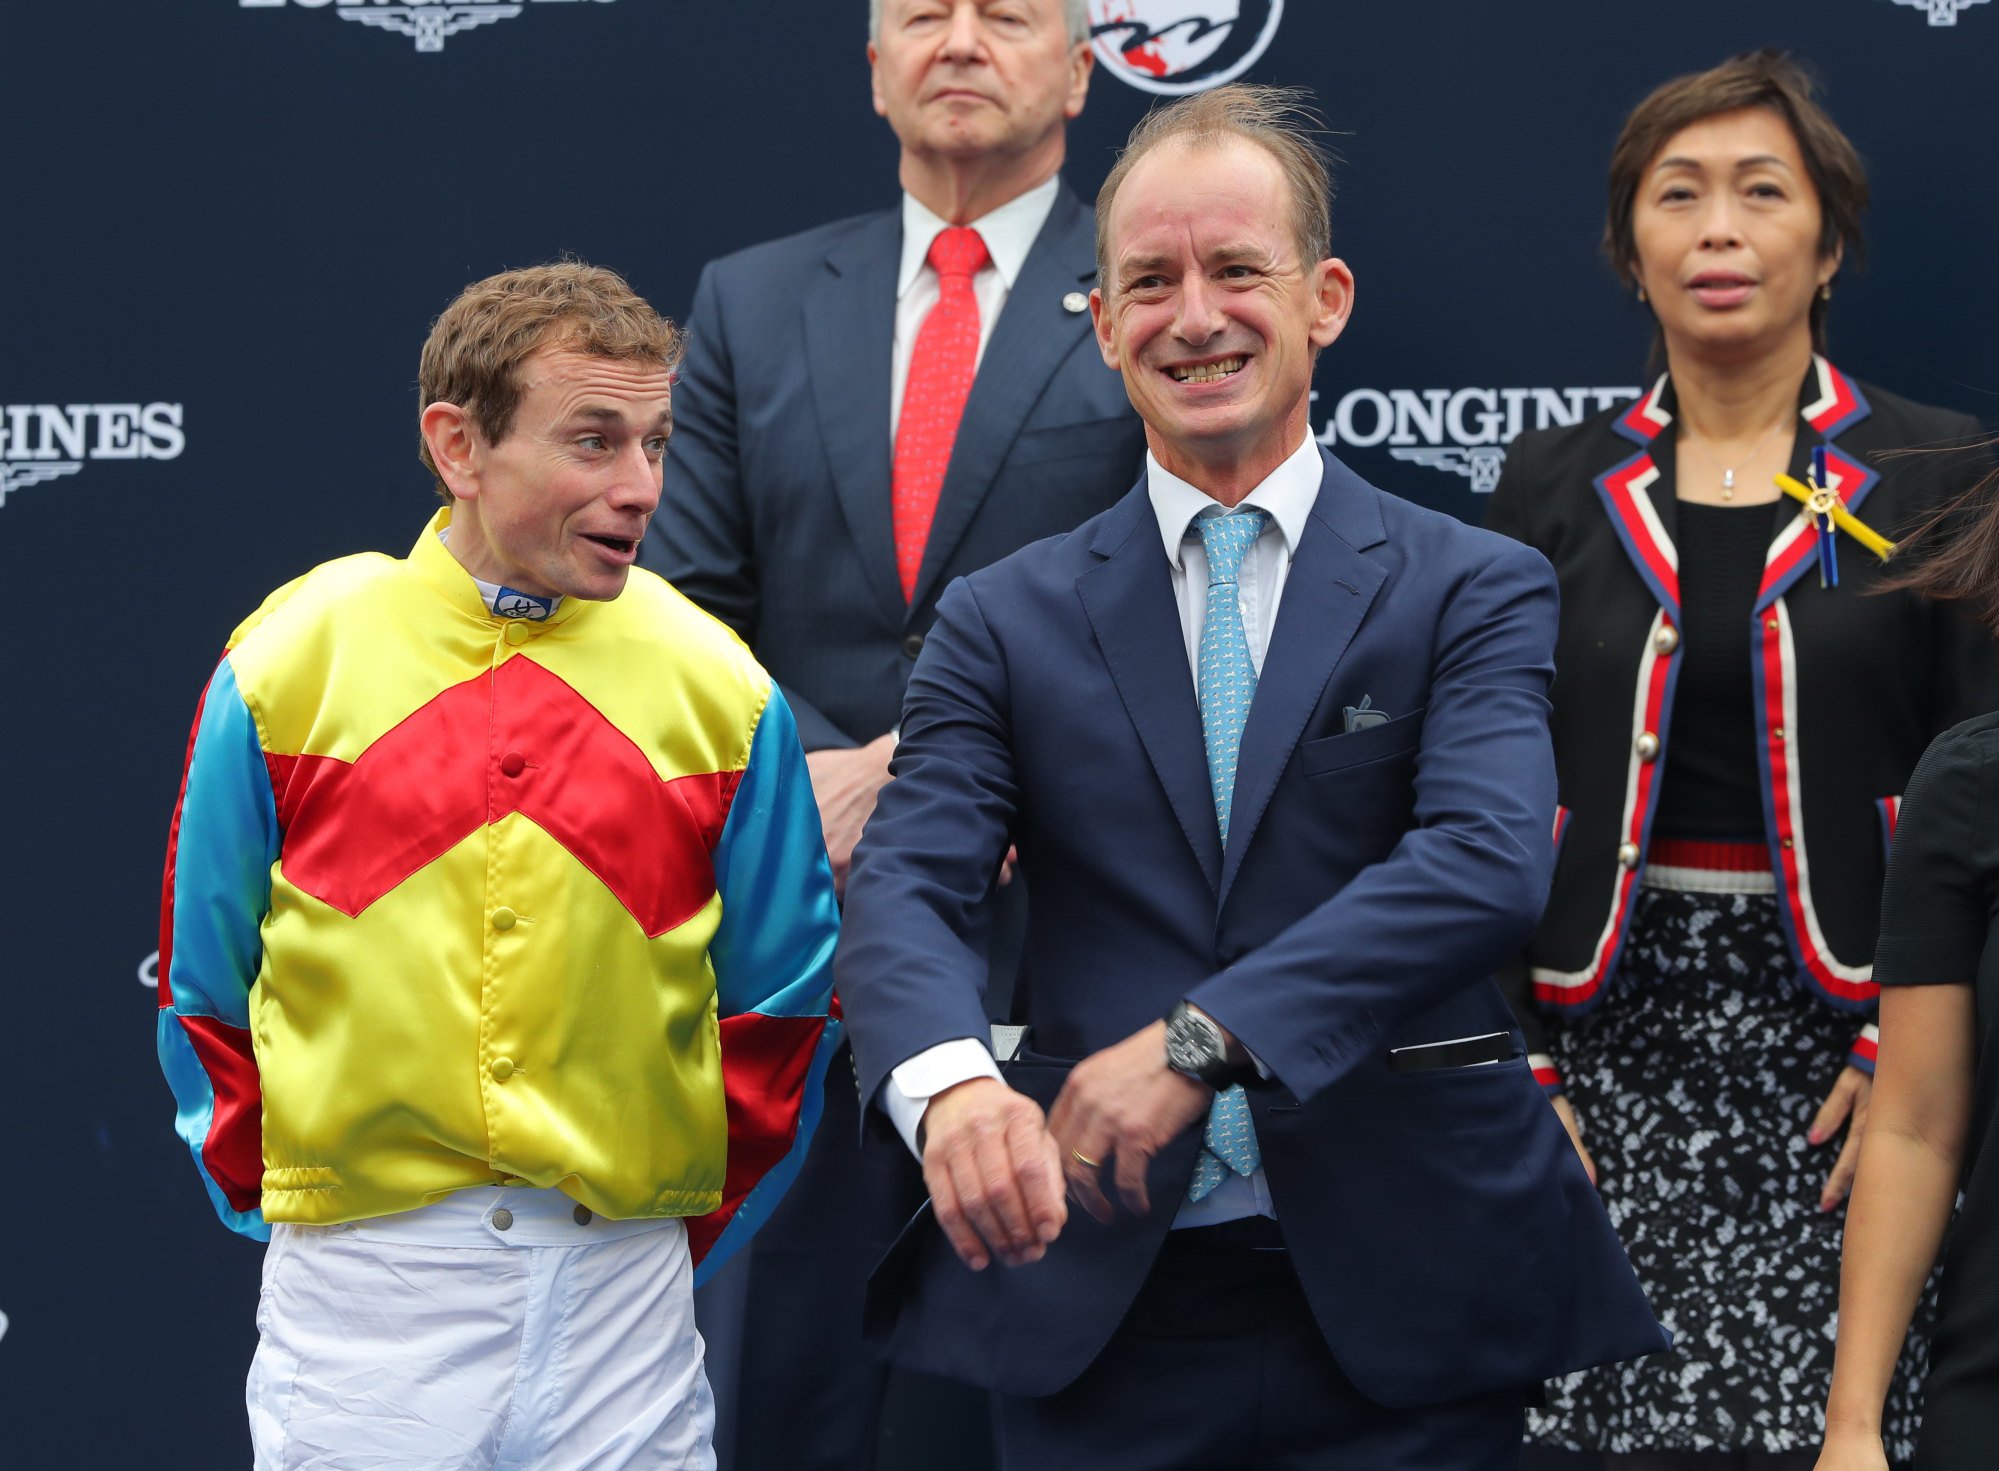 Wellington’s jockey Ryan Moore and trainer Richard Gibson are all smiles during the Hong Kong Sprint presentation.